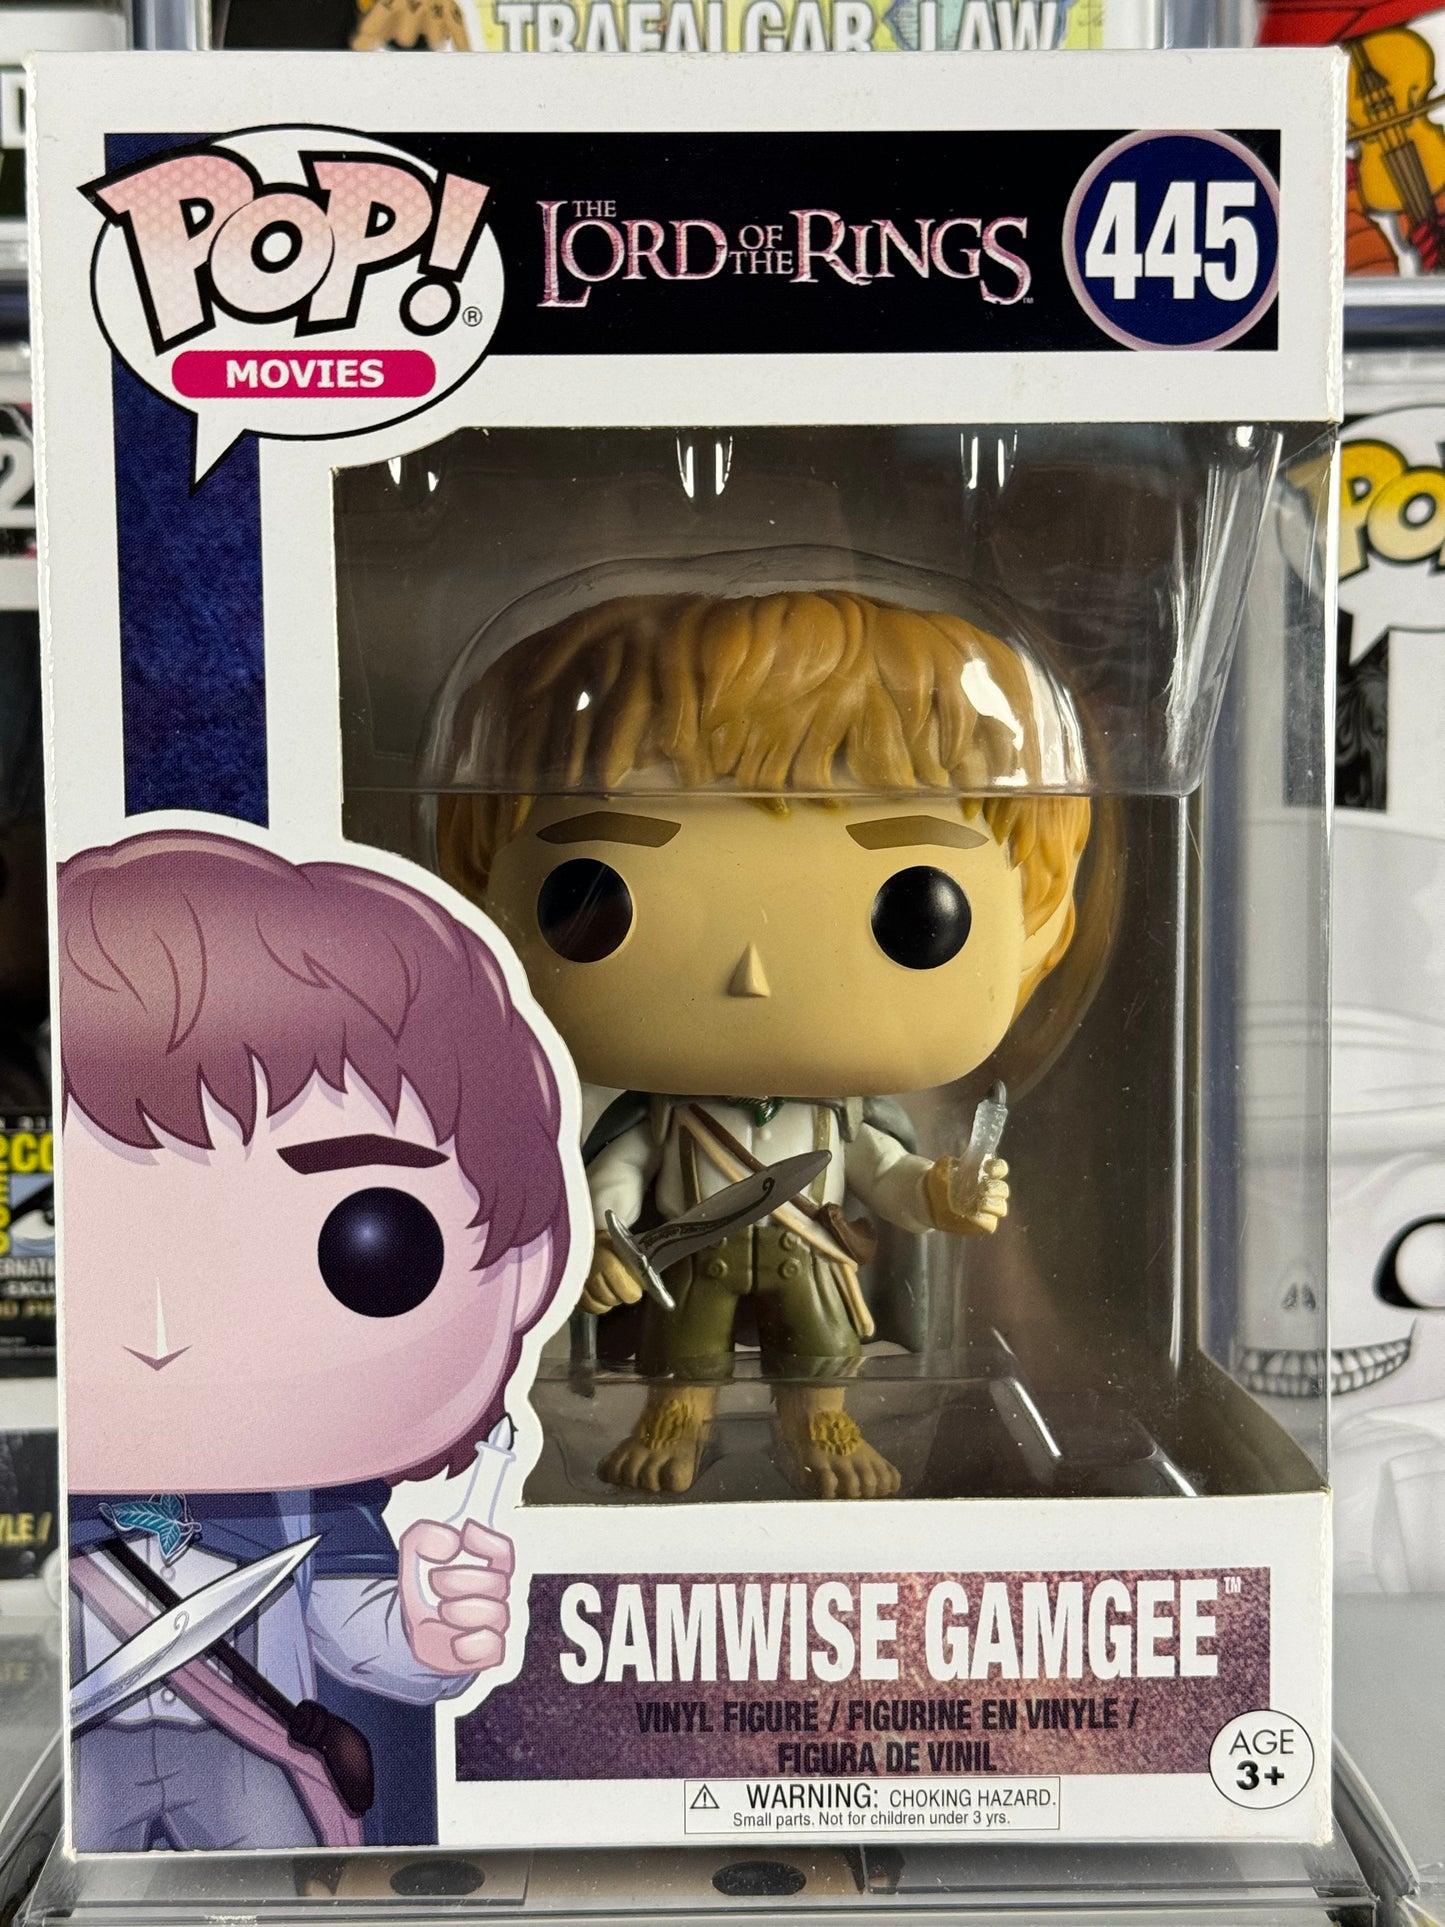 The Lord of the Rings - Samwise Gamgee (445)